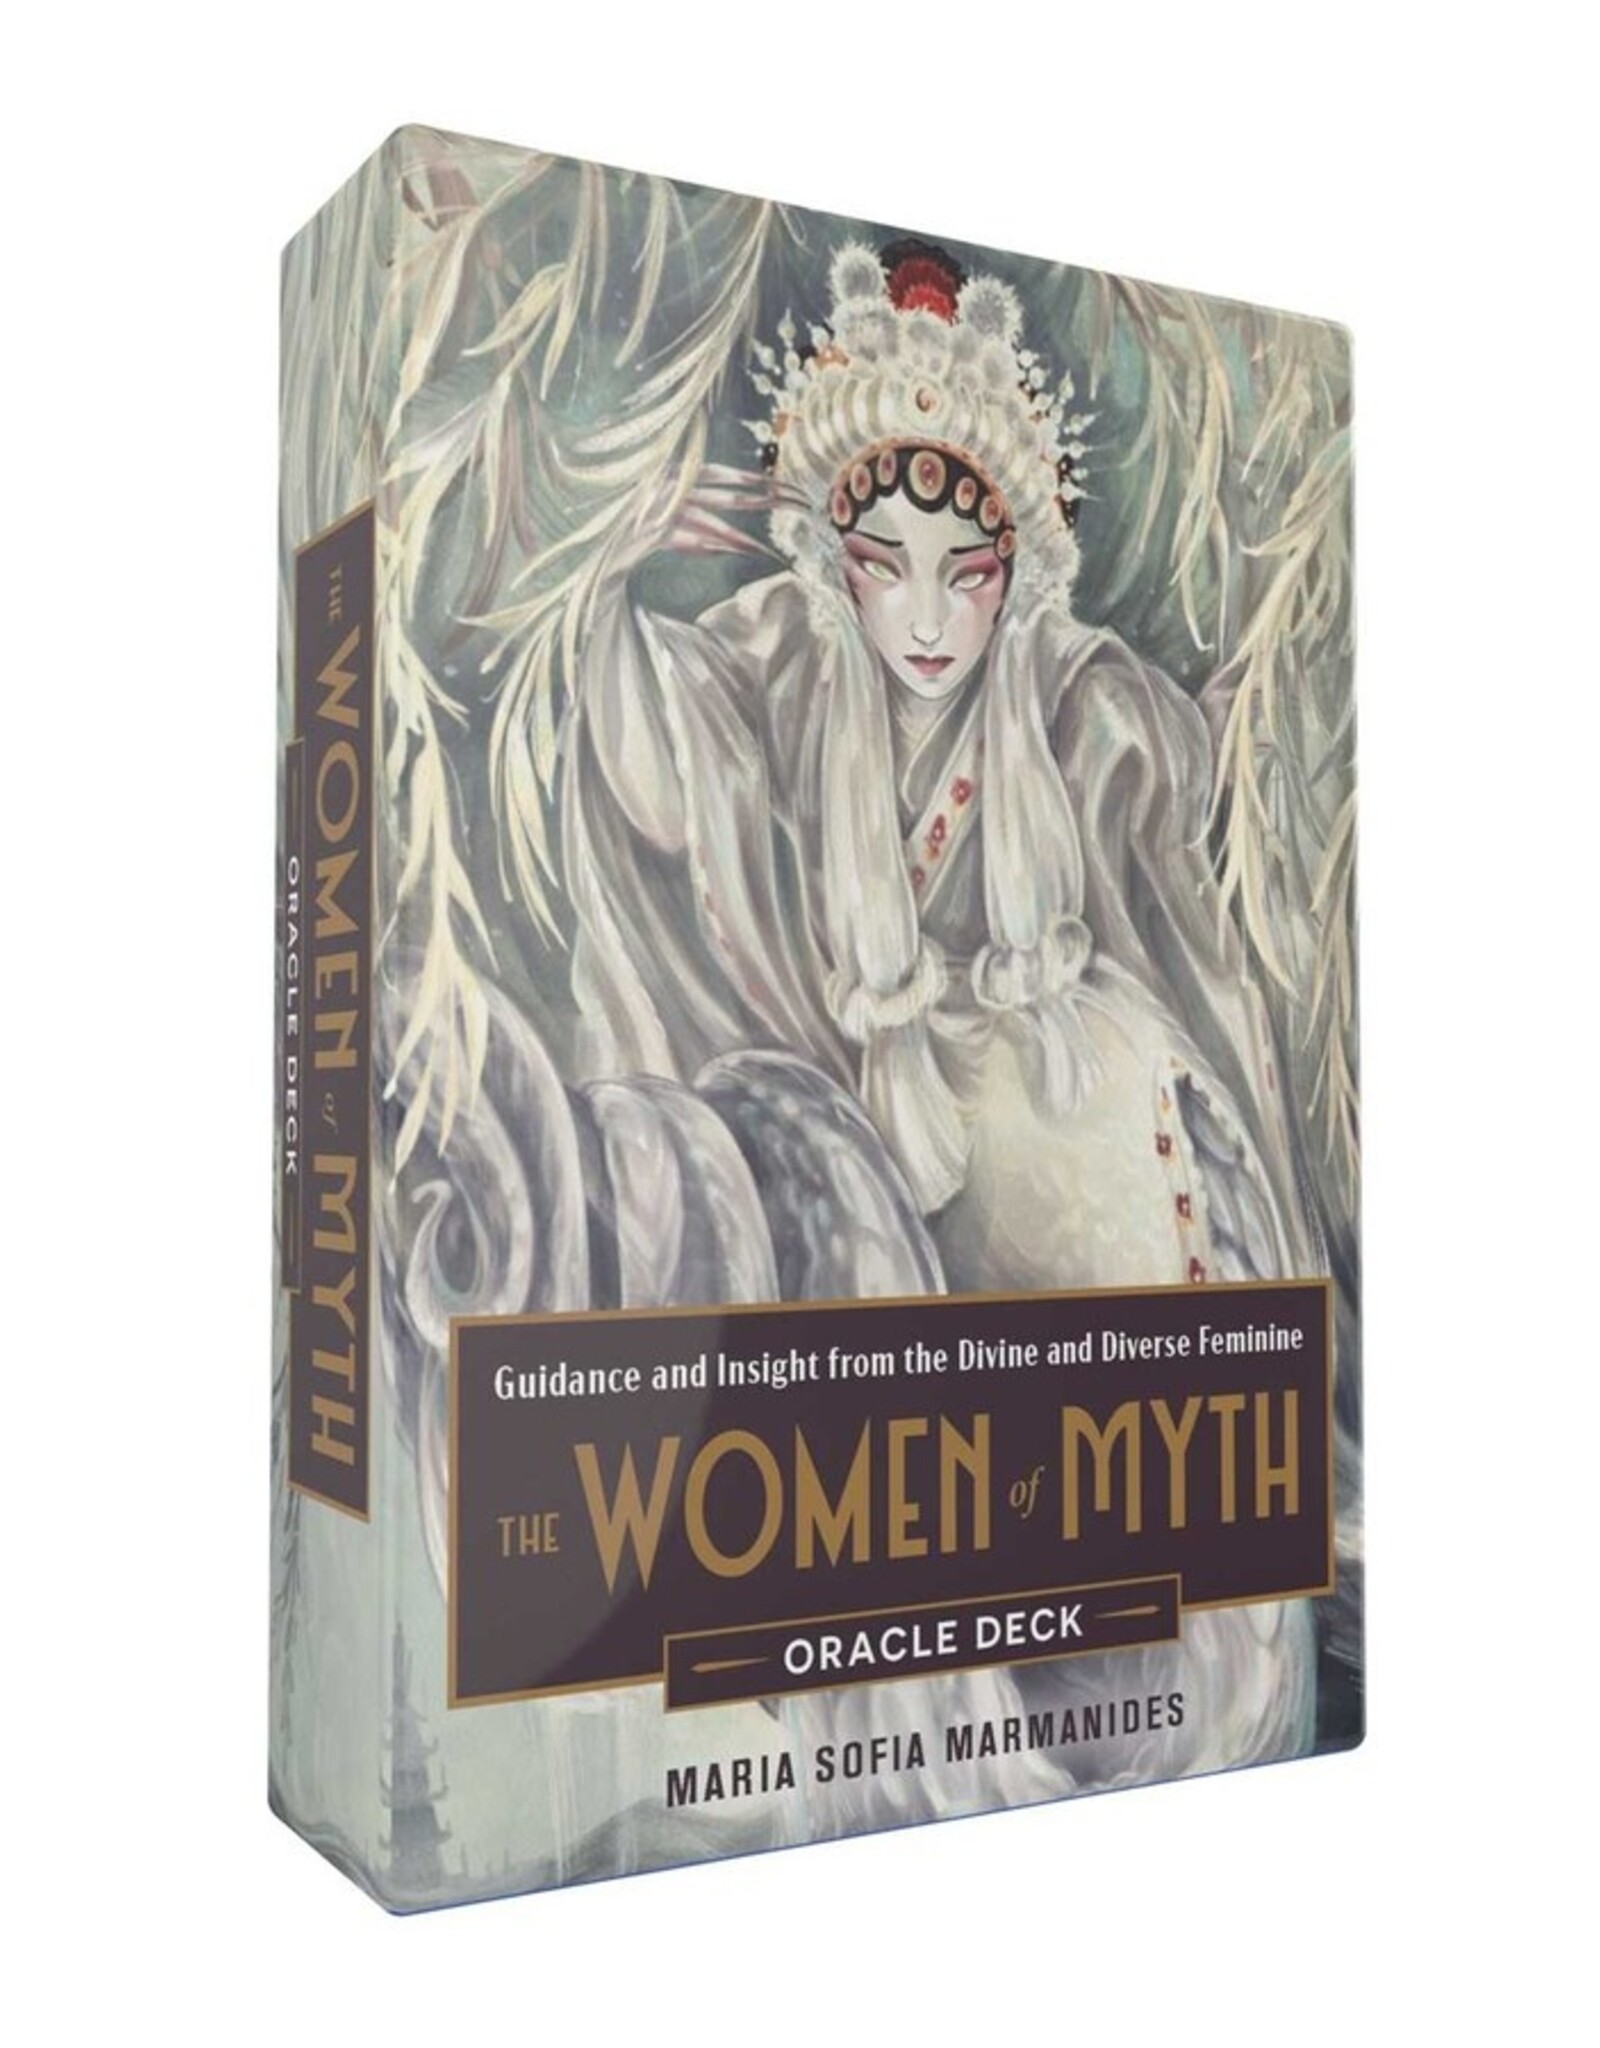 Simon & Schuster *The Women of Myth Oracle Deck